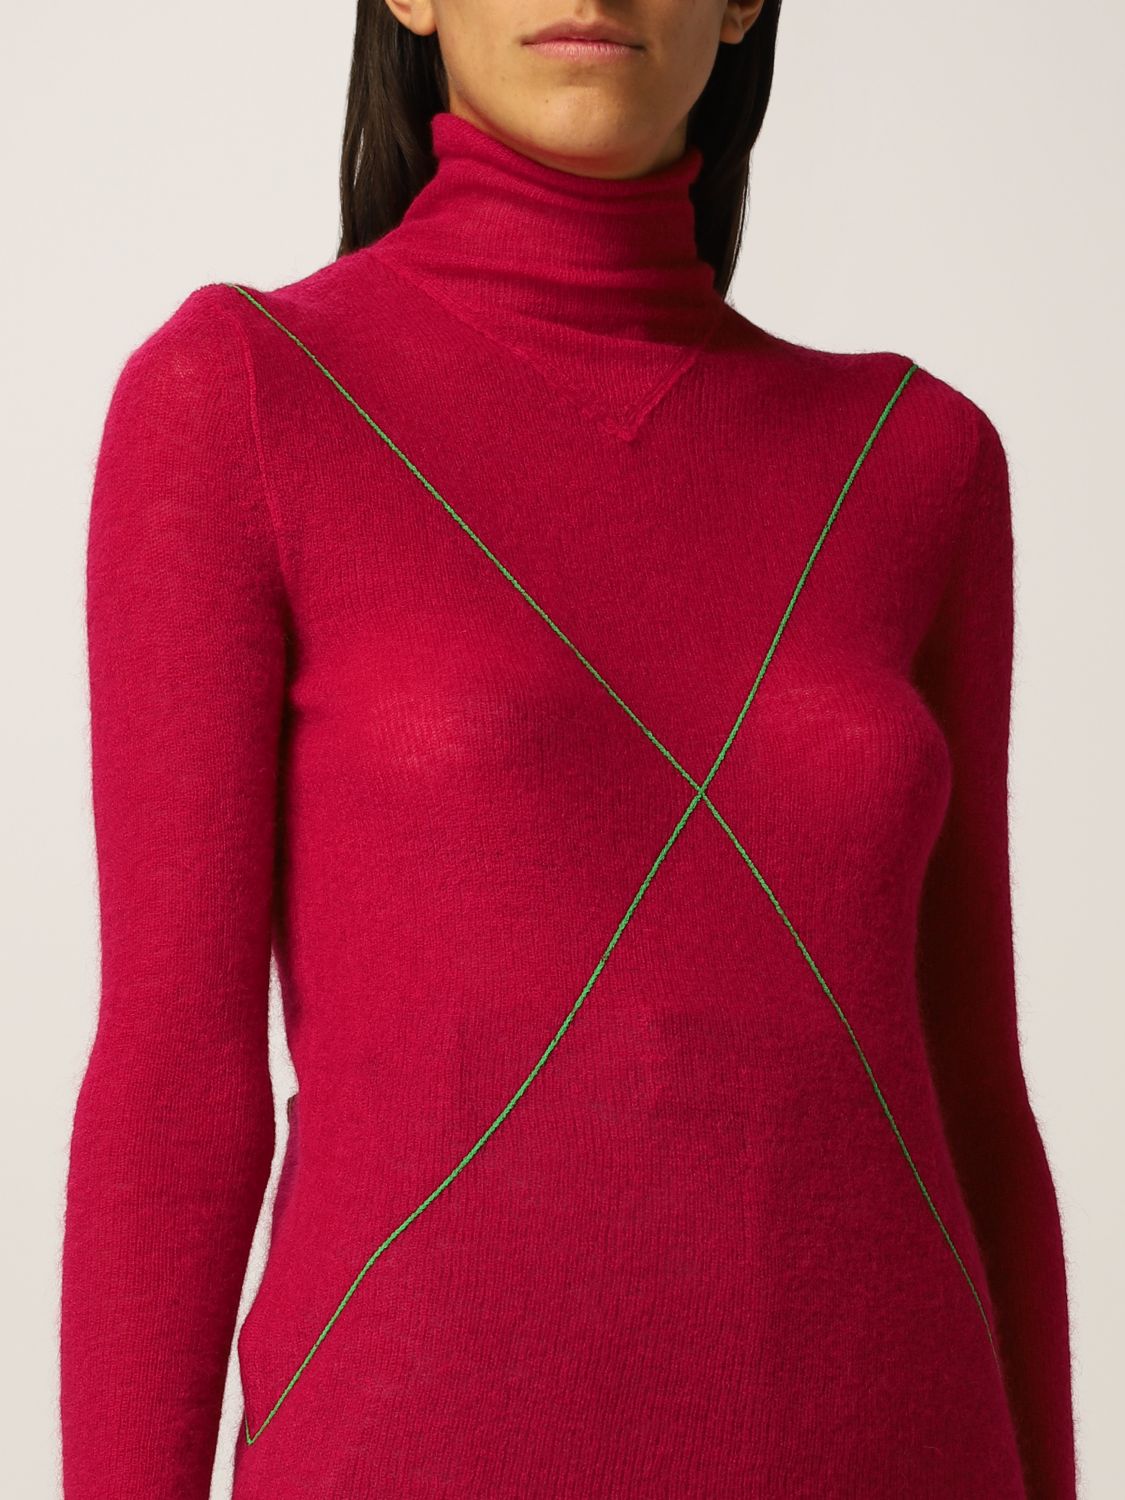 Bottega Veneta Synthetic Roll Neck Knit Jumper in Red Womens Clothing Jumpers and knitwear Turtlenecks 